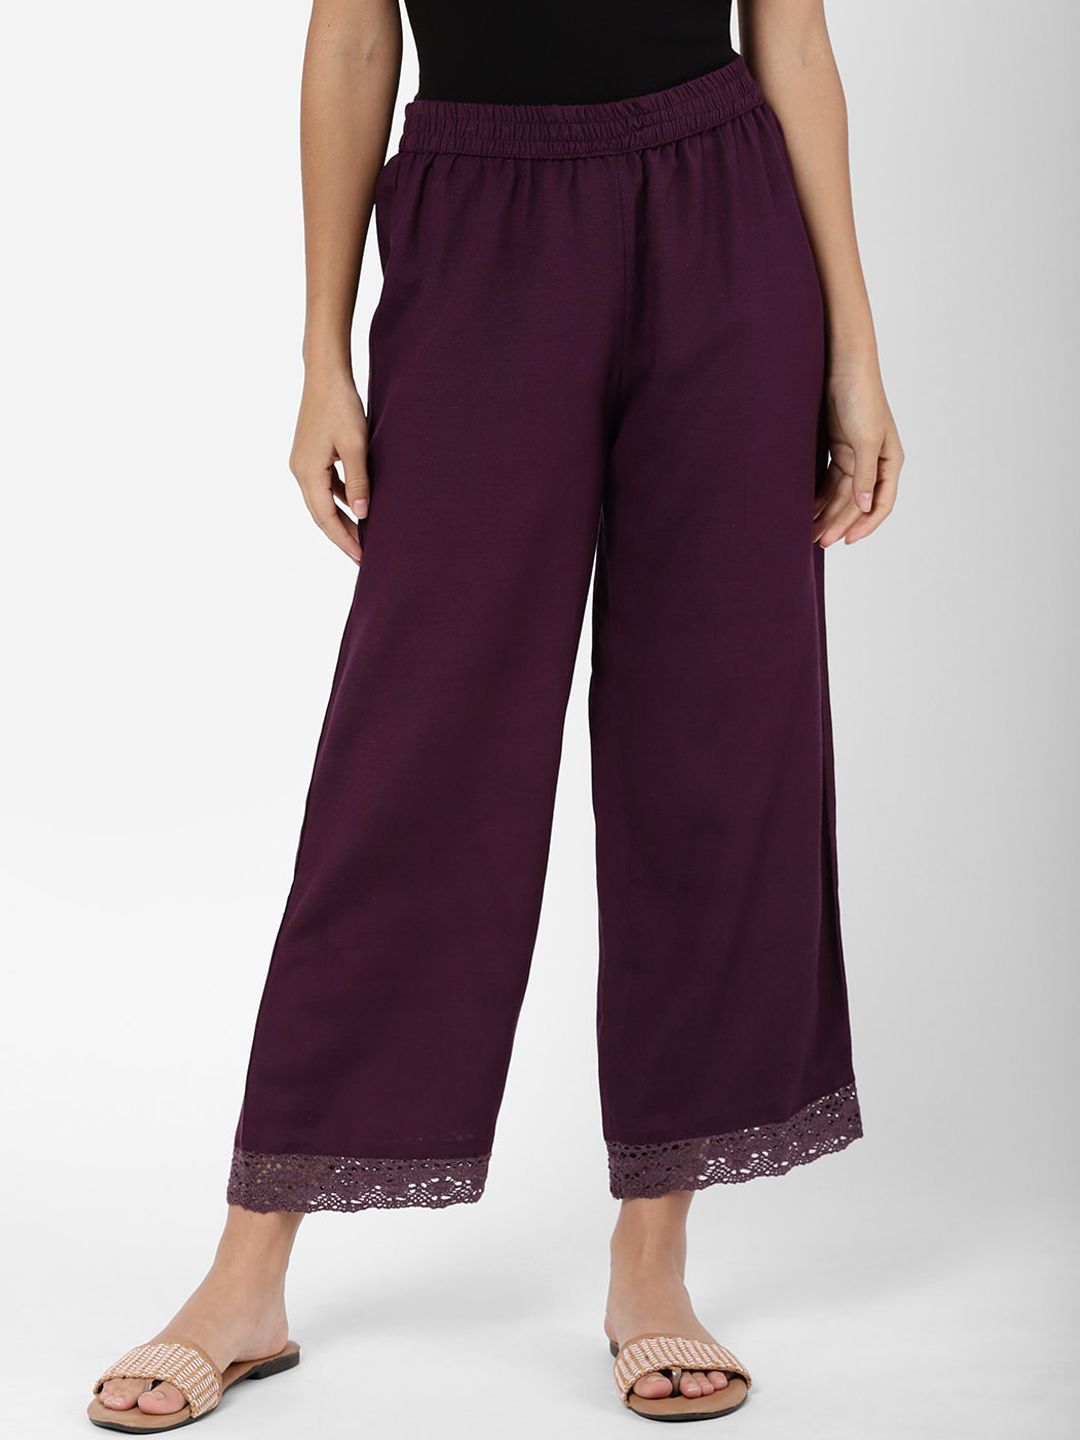 Myntra Women Trousers Price in India  Women Trousers Price List in India 